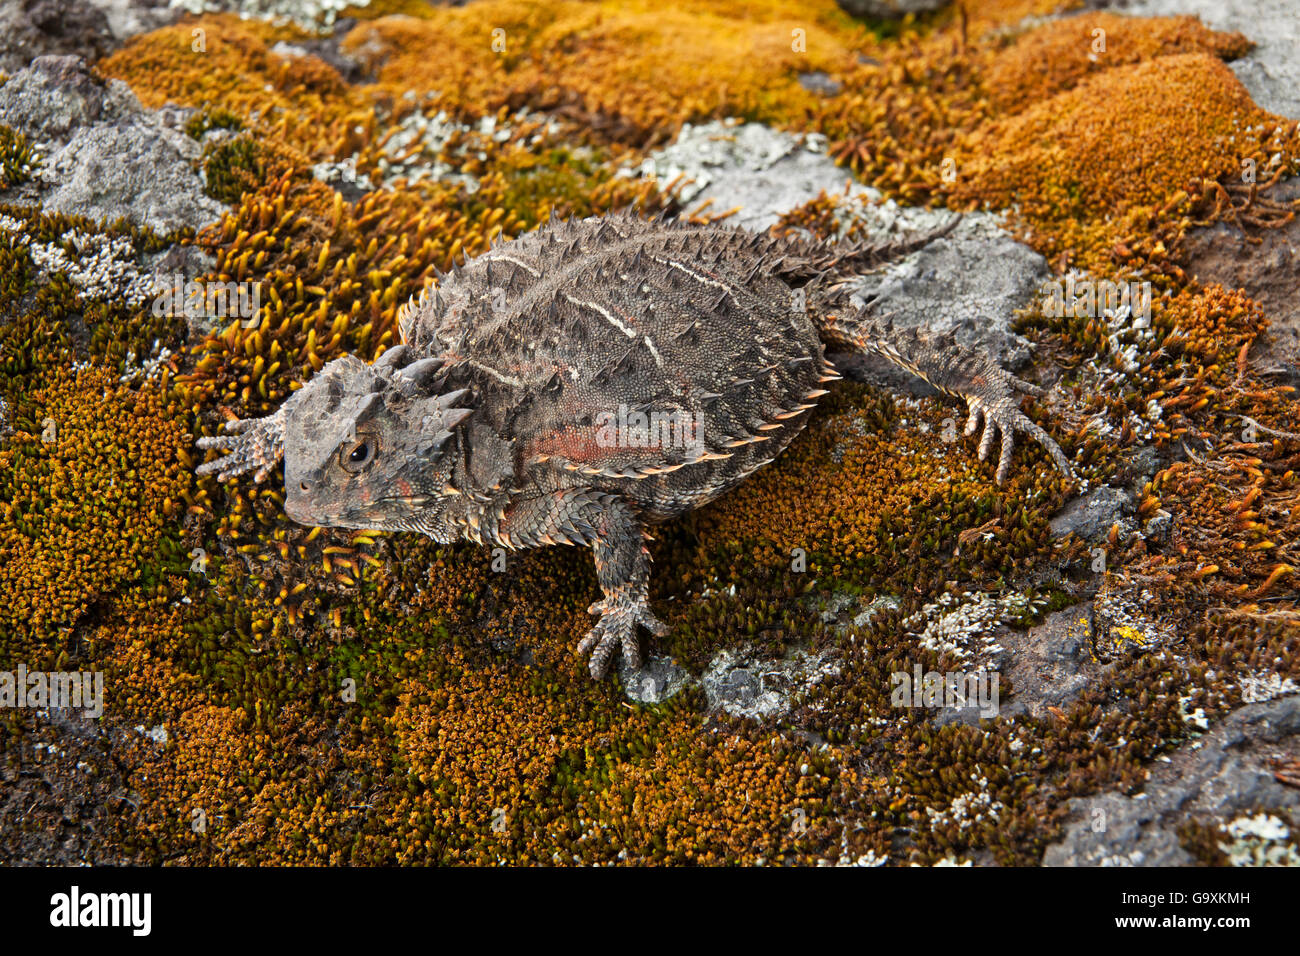 Mexican Mountain Horned Lizard (Phrynosoma orbiculare), Milpa Alta Forest, Mexico, March Stock Photo